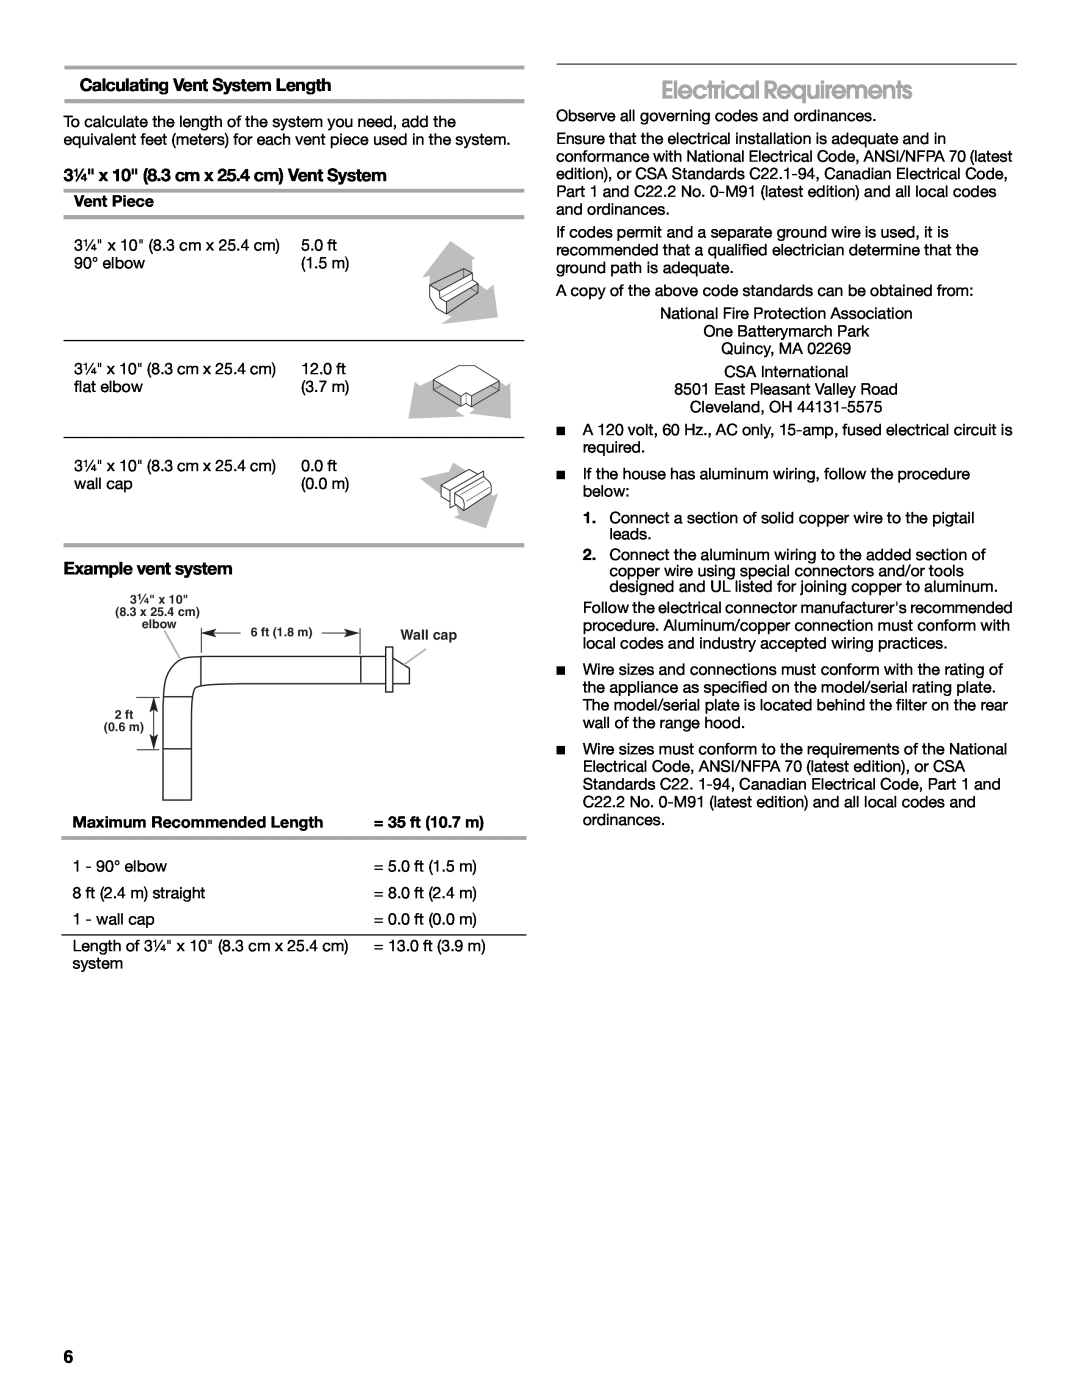 Whirlpool UXT3036AY Electrical Requirements, Calculating Vent System Length, 3¹⁄₄ x 10 8.3 cm x 25.4 cm Vent System 